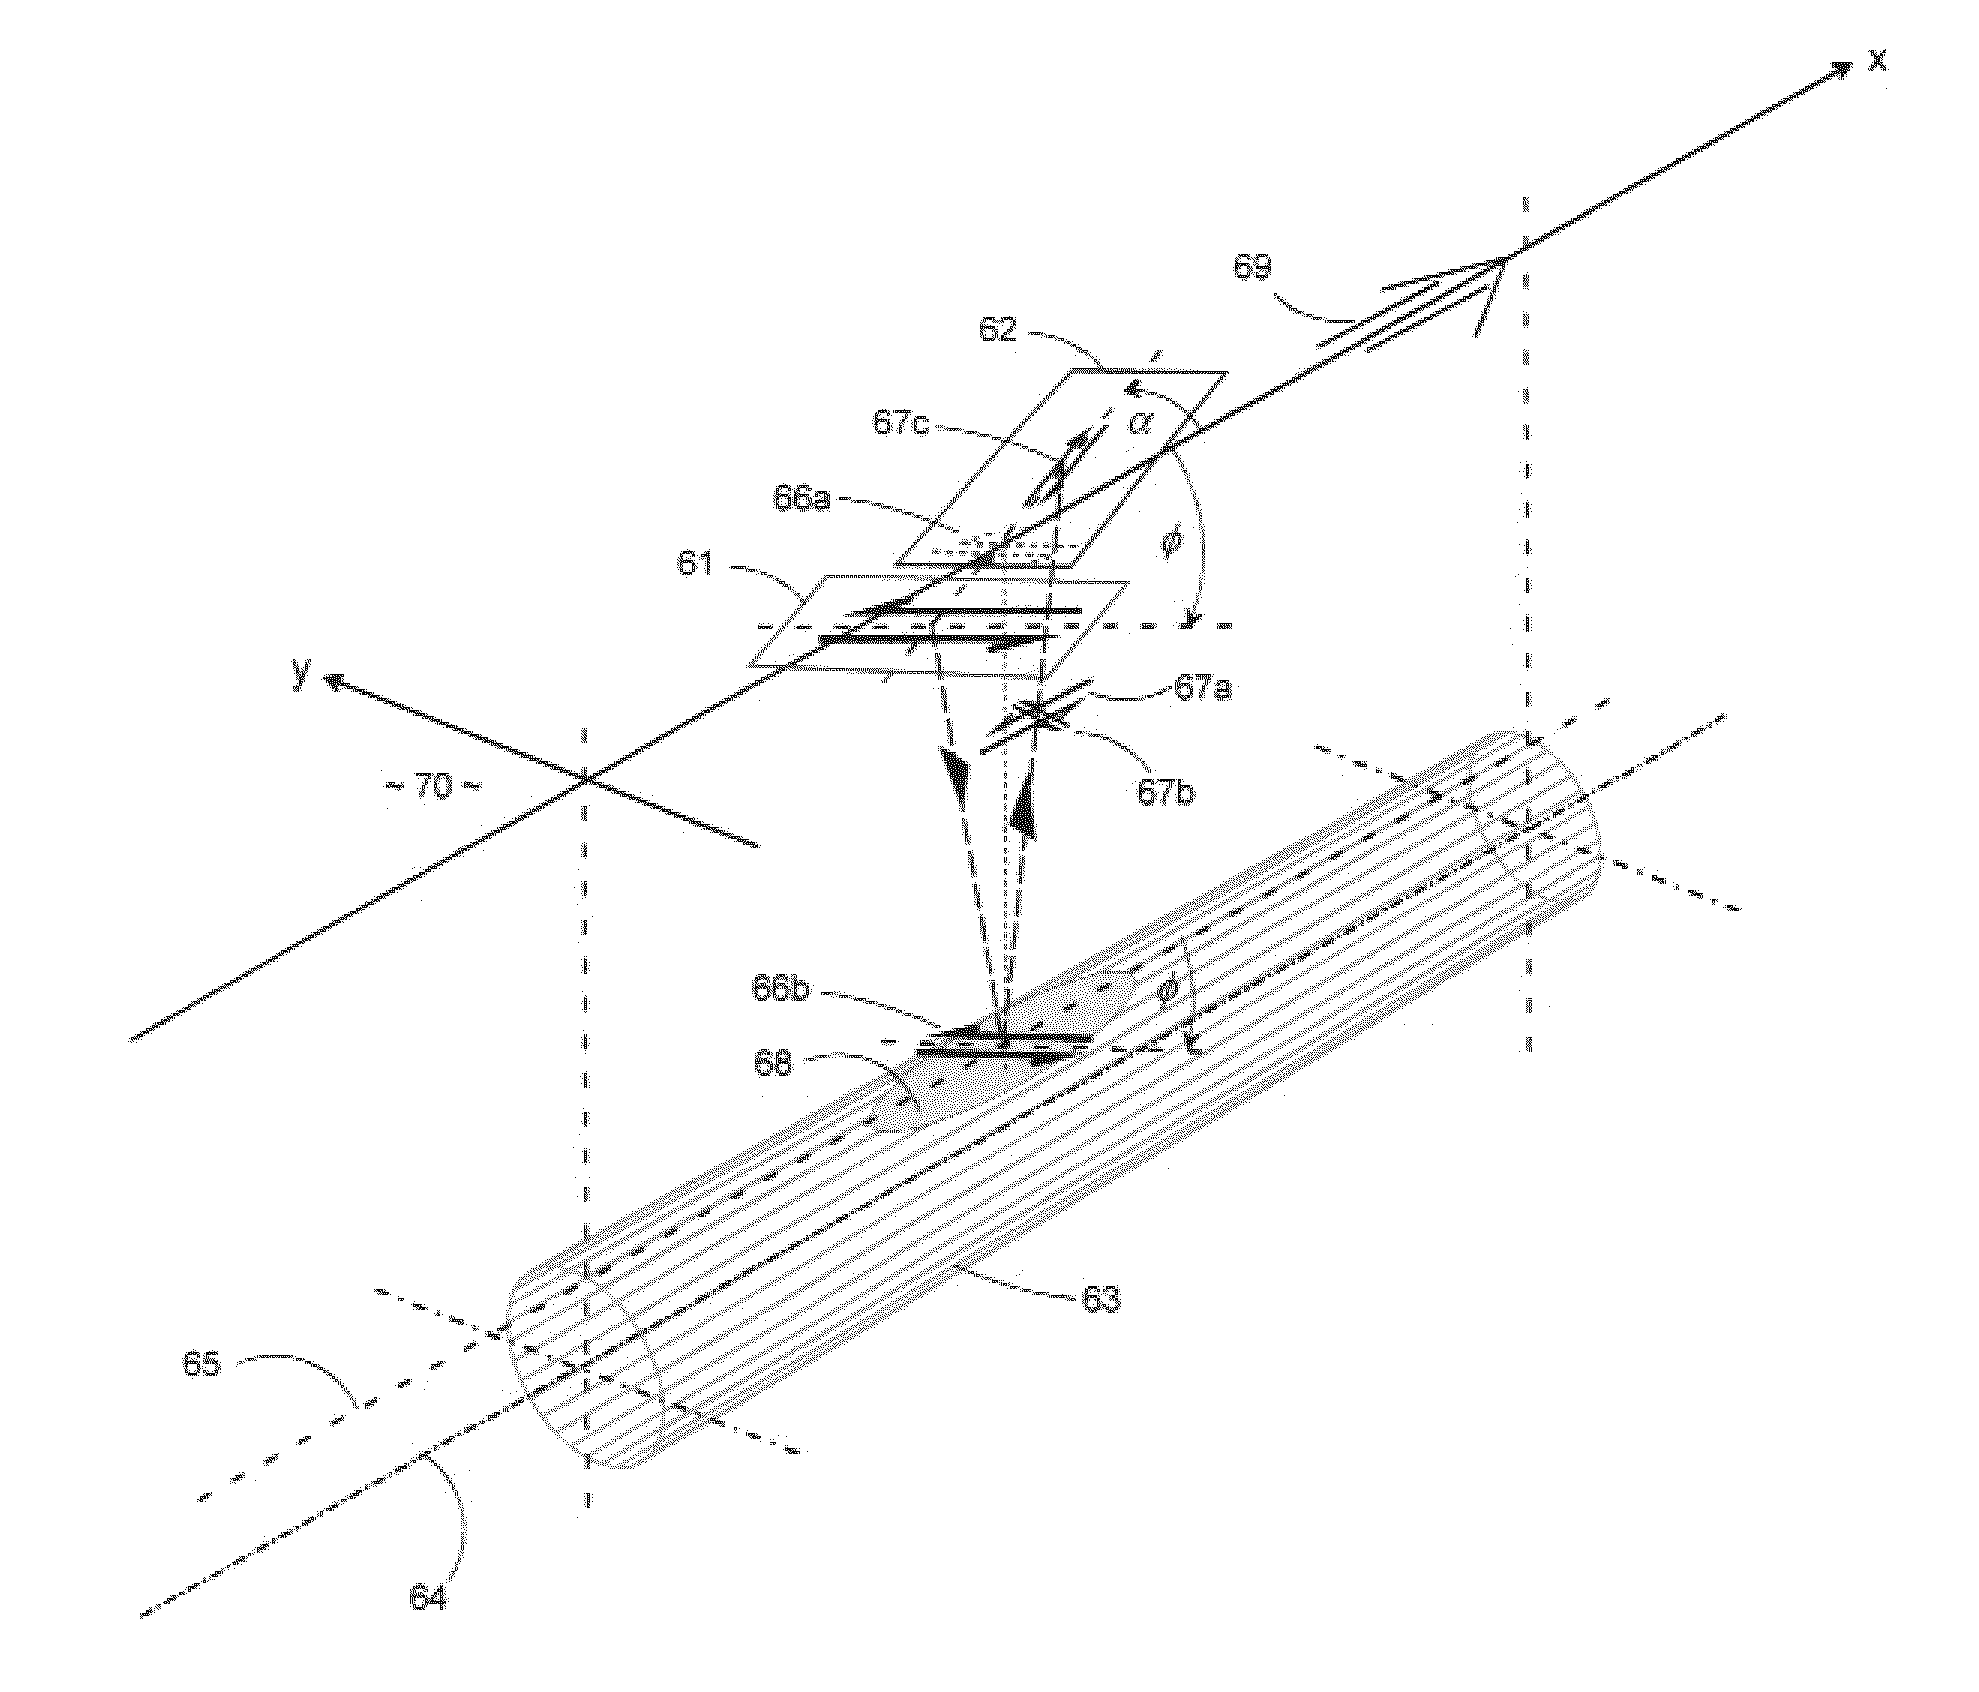 Method and Apparatus for Selective Seismic Detection of Elongated Targets